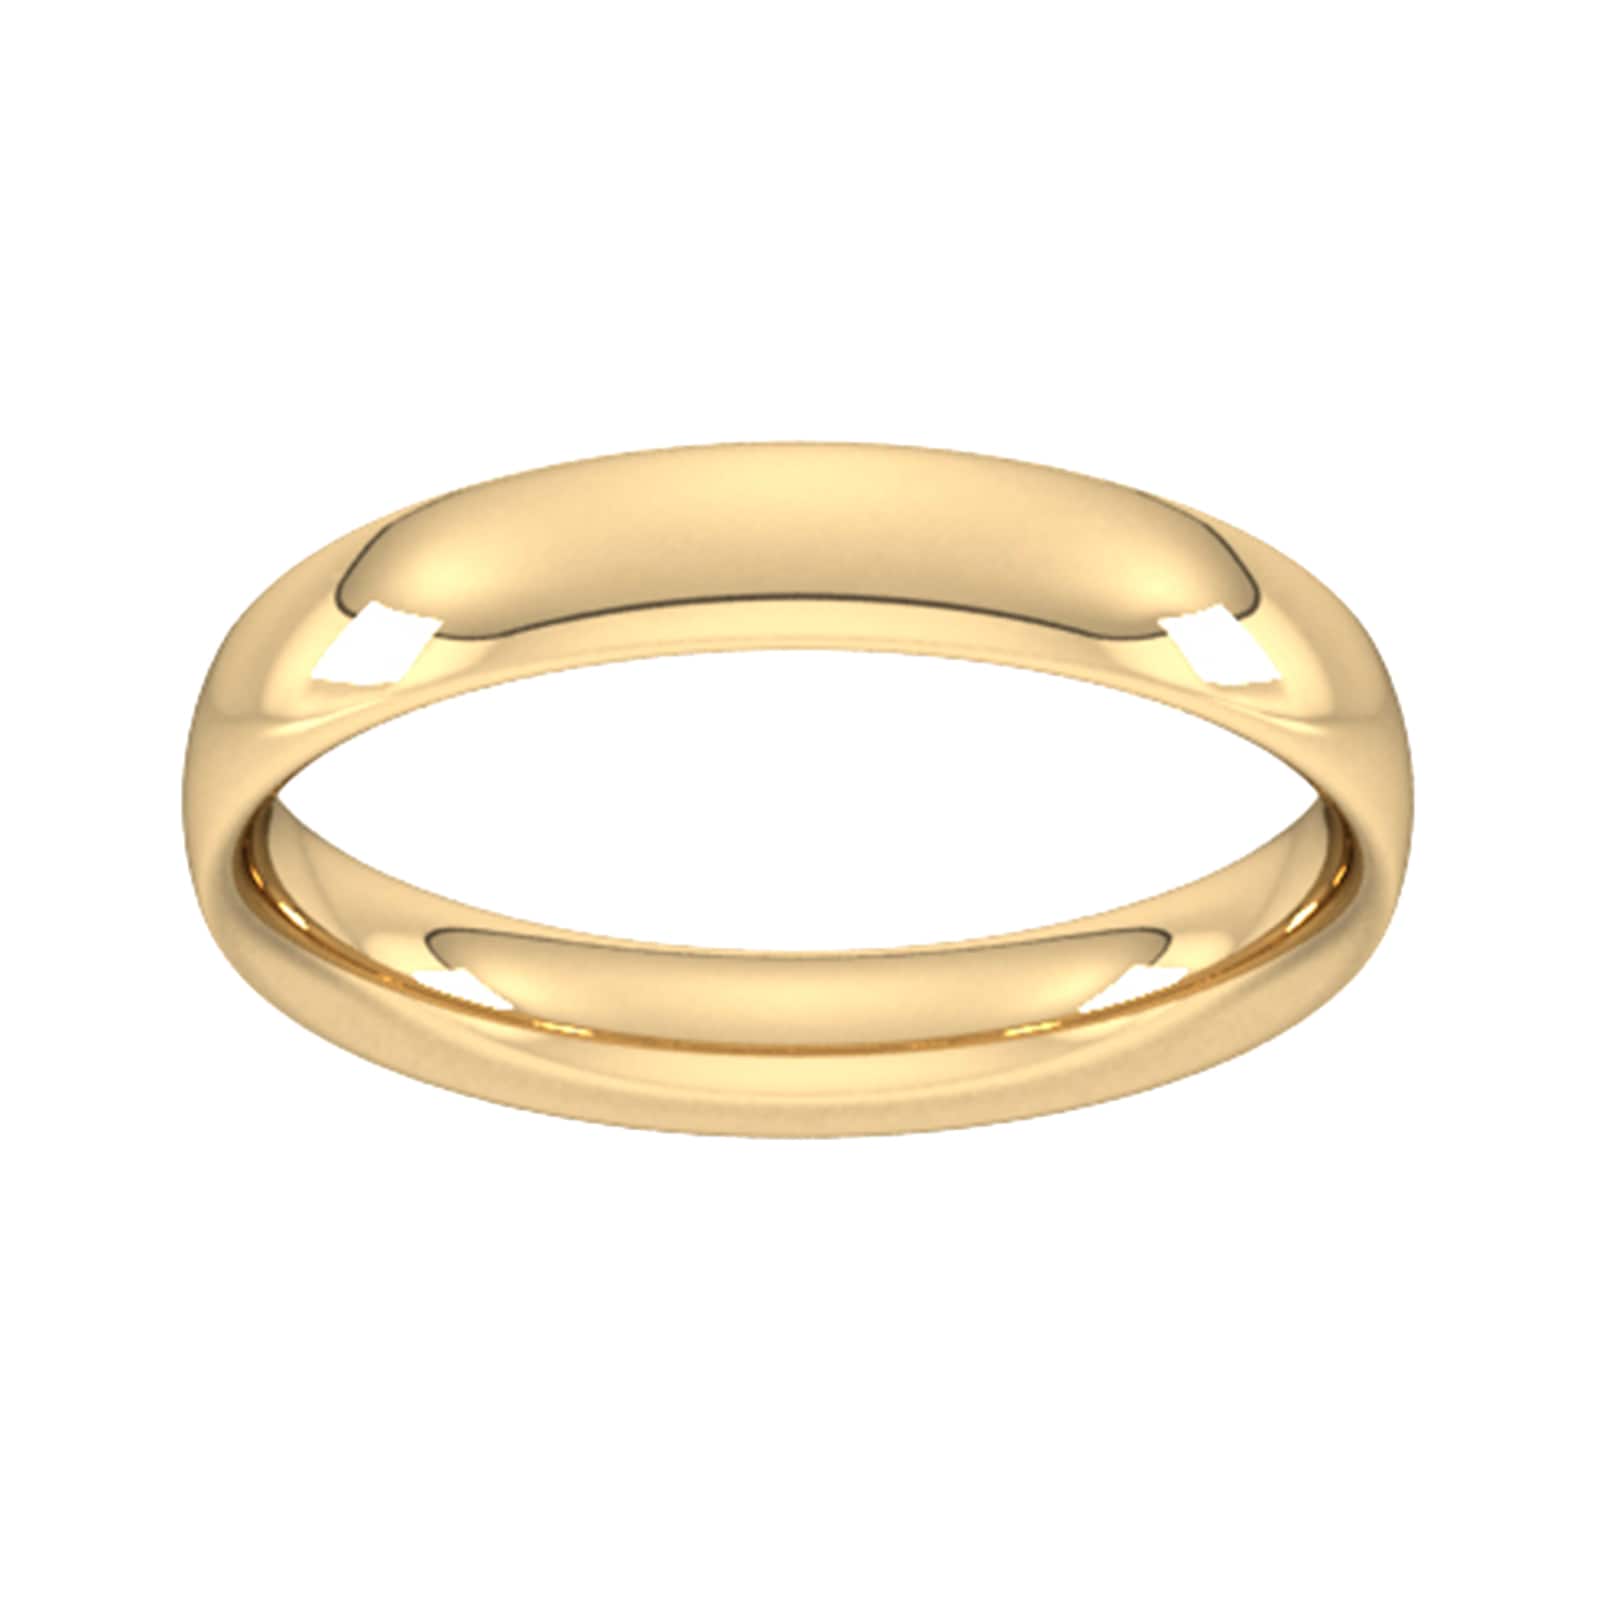 4mm Traditional Court Heavy Wedding Ring In 18 Carat Yellow Gold - Ring Size N